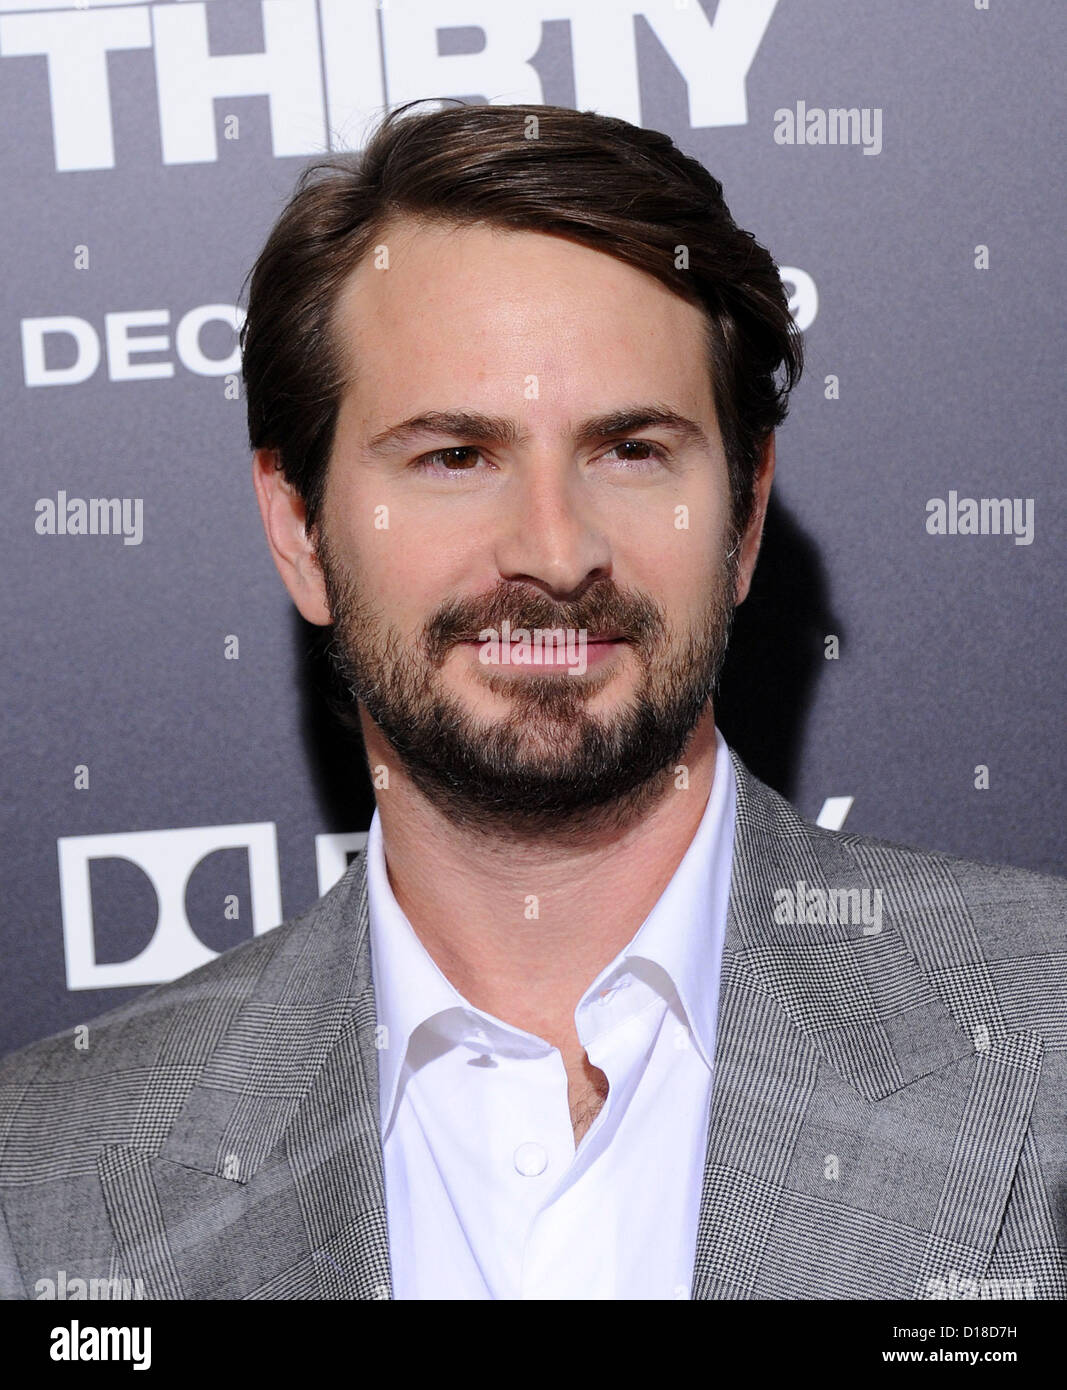 Dec. 9, 2012 - Hollywood, California, U.S. - Mark Boal arrives for the premiere of the film 'Zero Dark Thirty' at the Dolby theater. (Credit Image: © Lisa O'Connor/ZUMAPRESS.com) Stock Photo